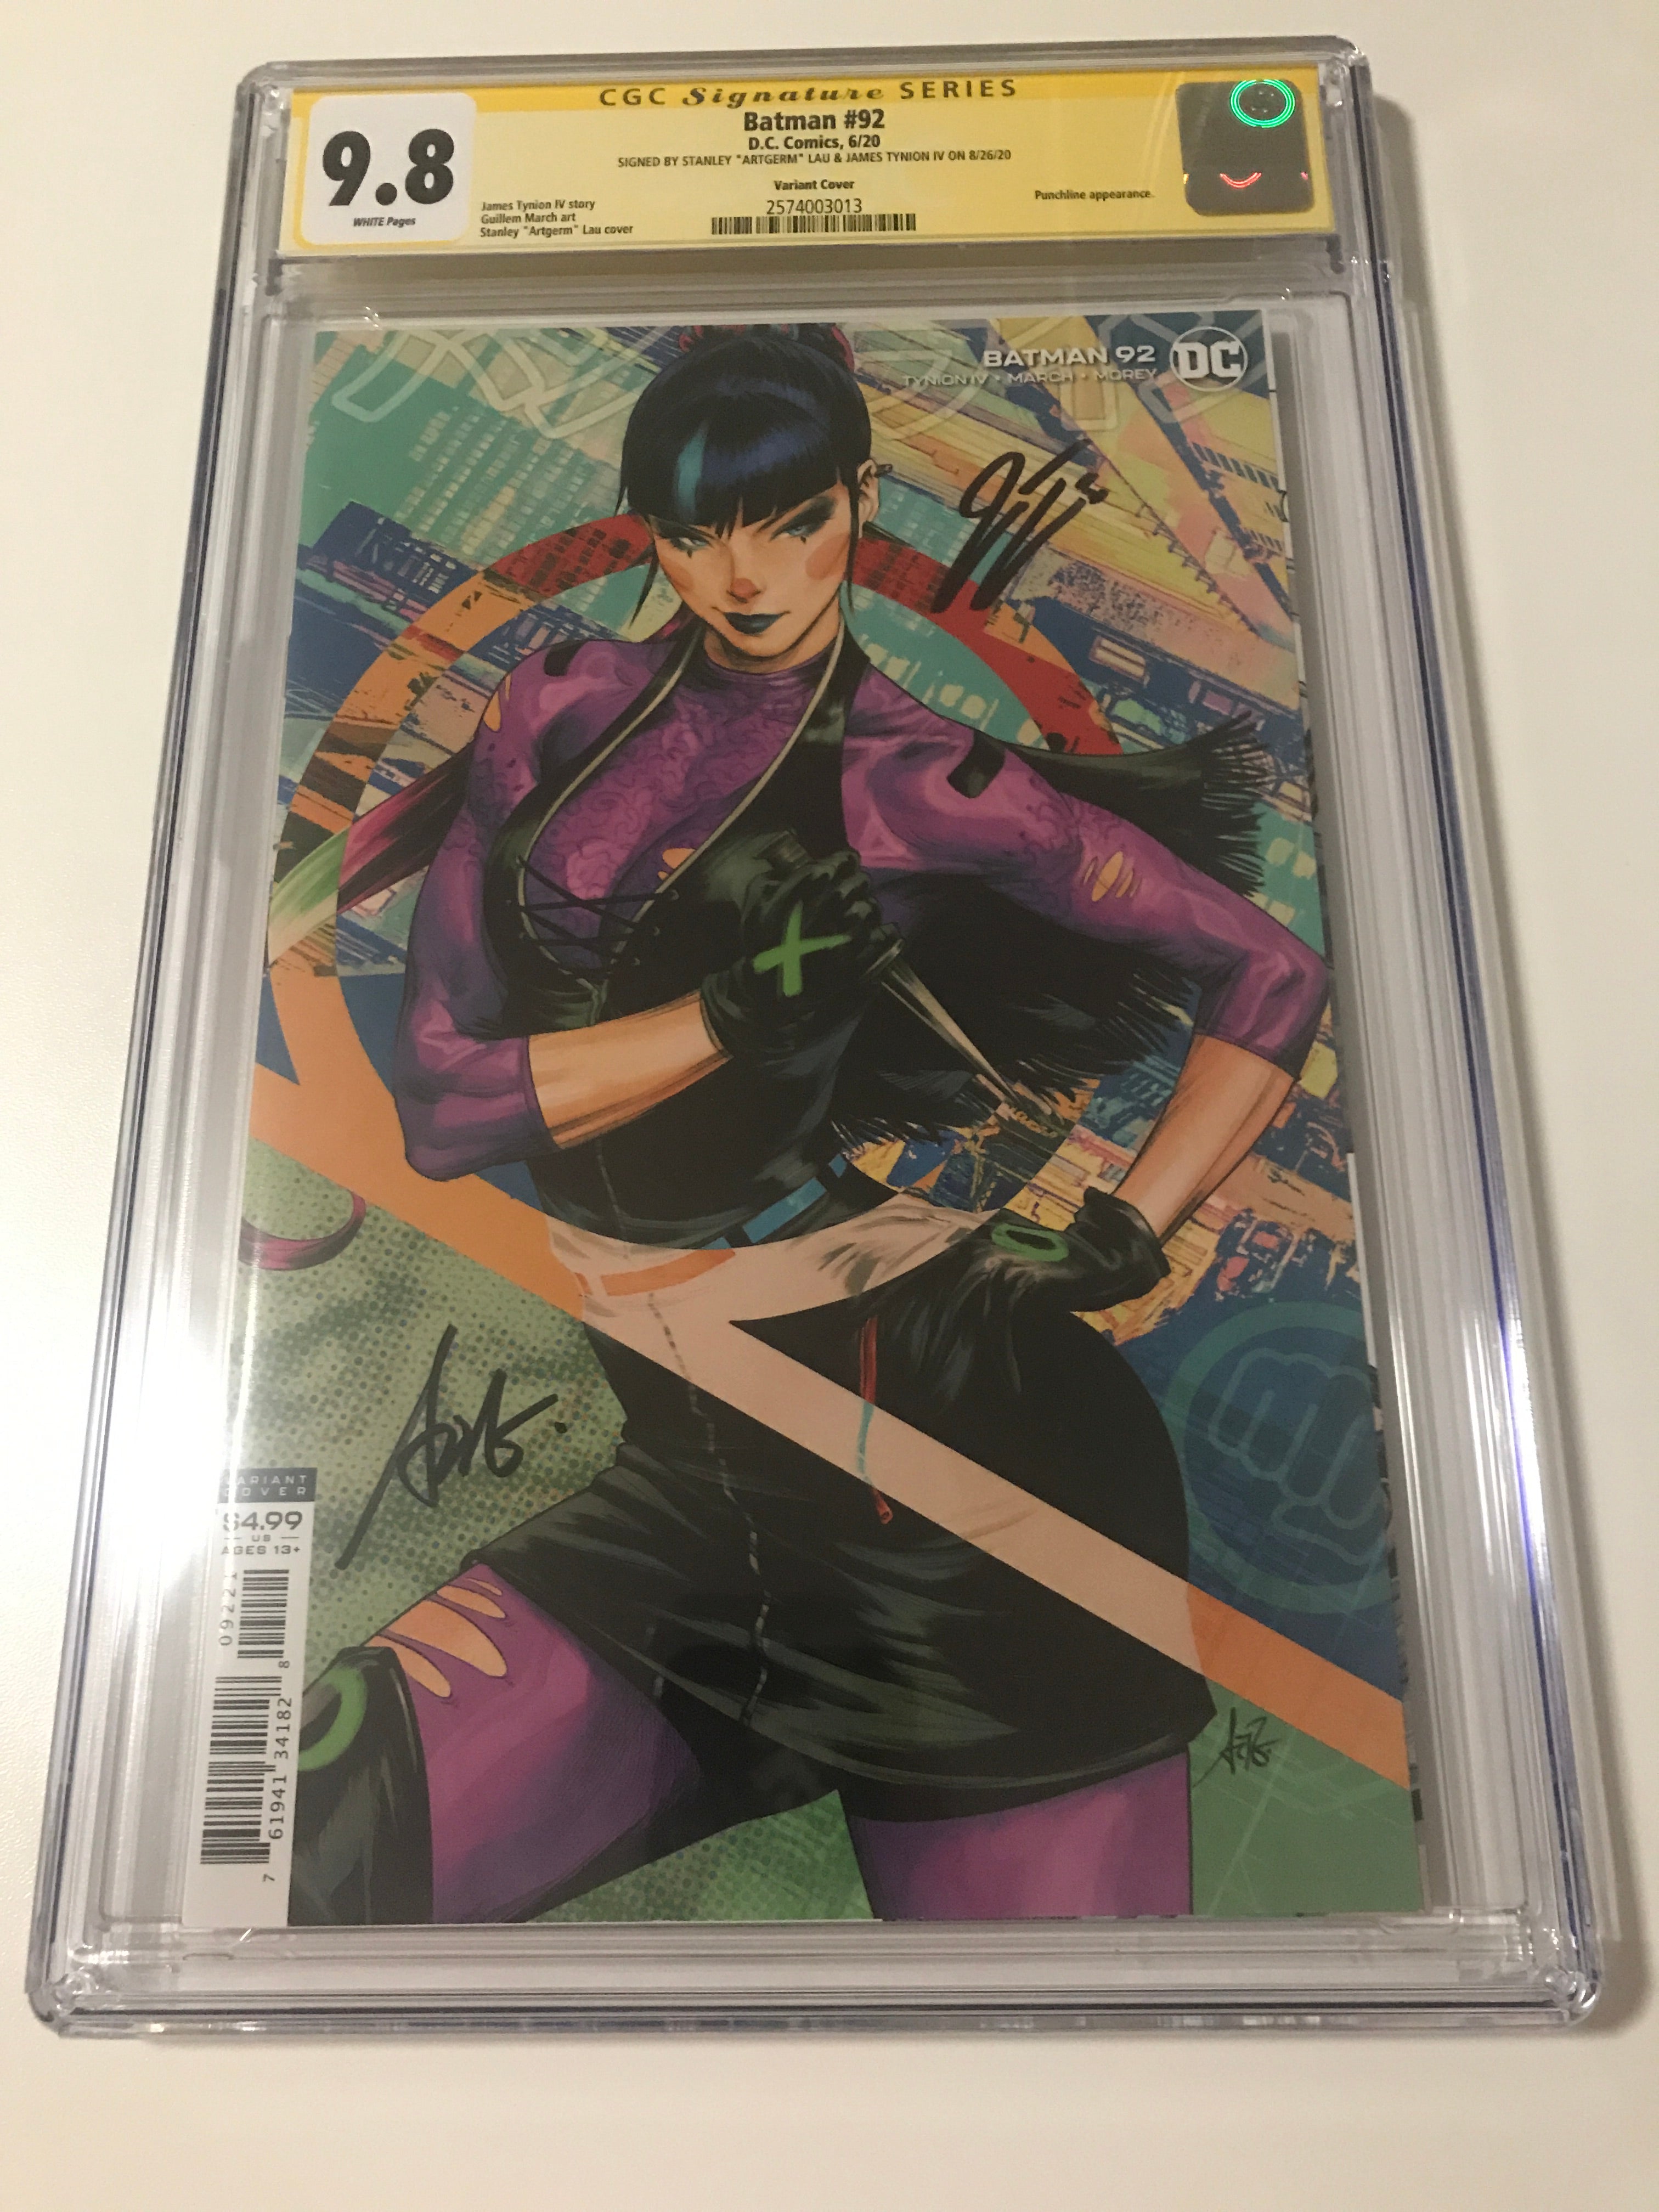 Batman 92 - CGC Signed By James Tynion IV & Artgerm | Heroes Cave